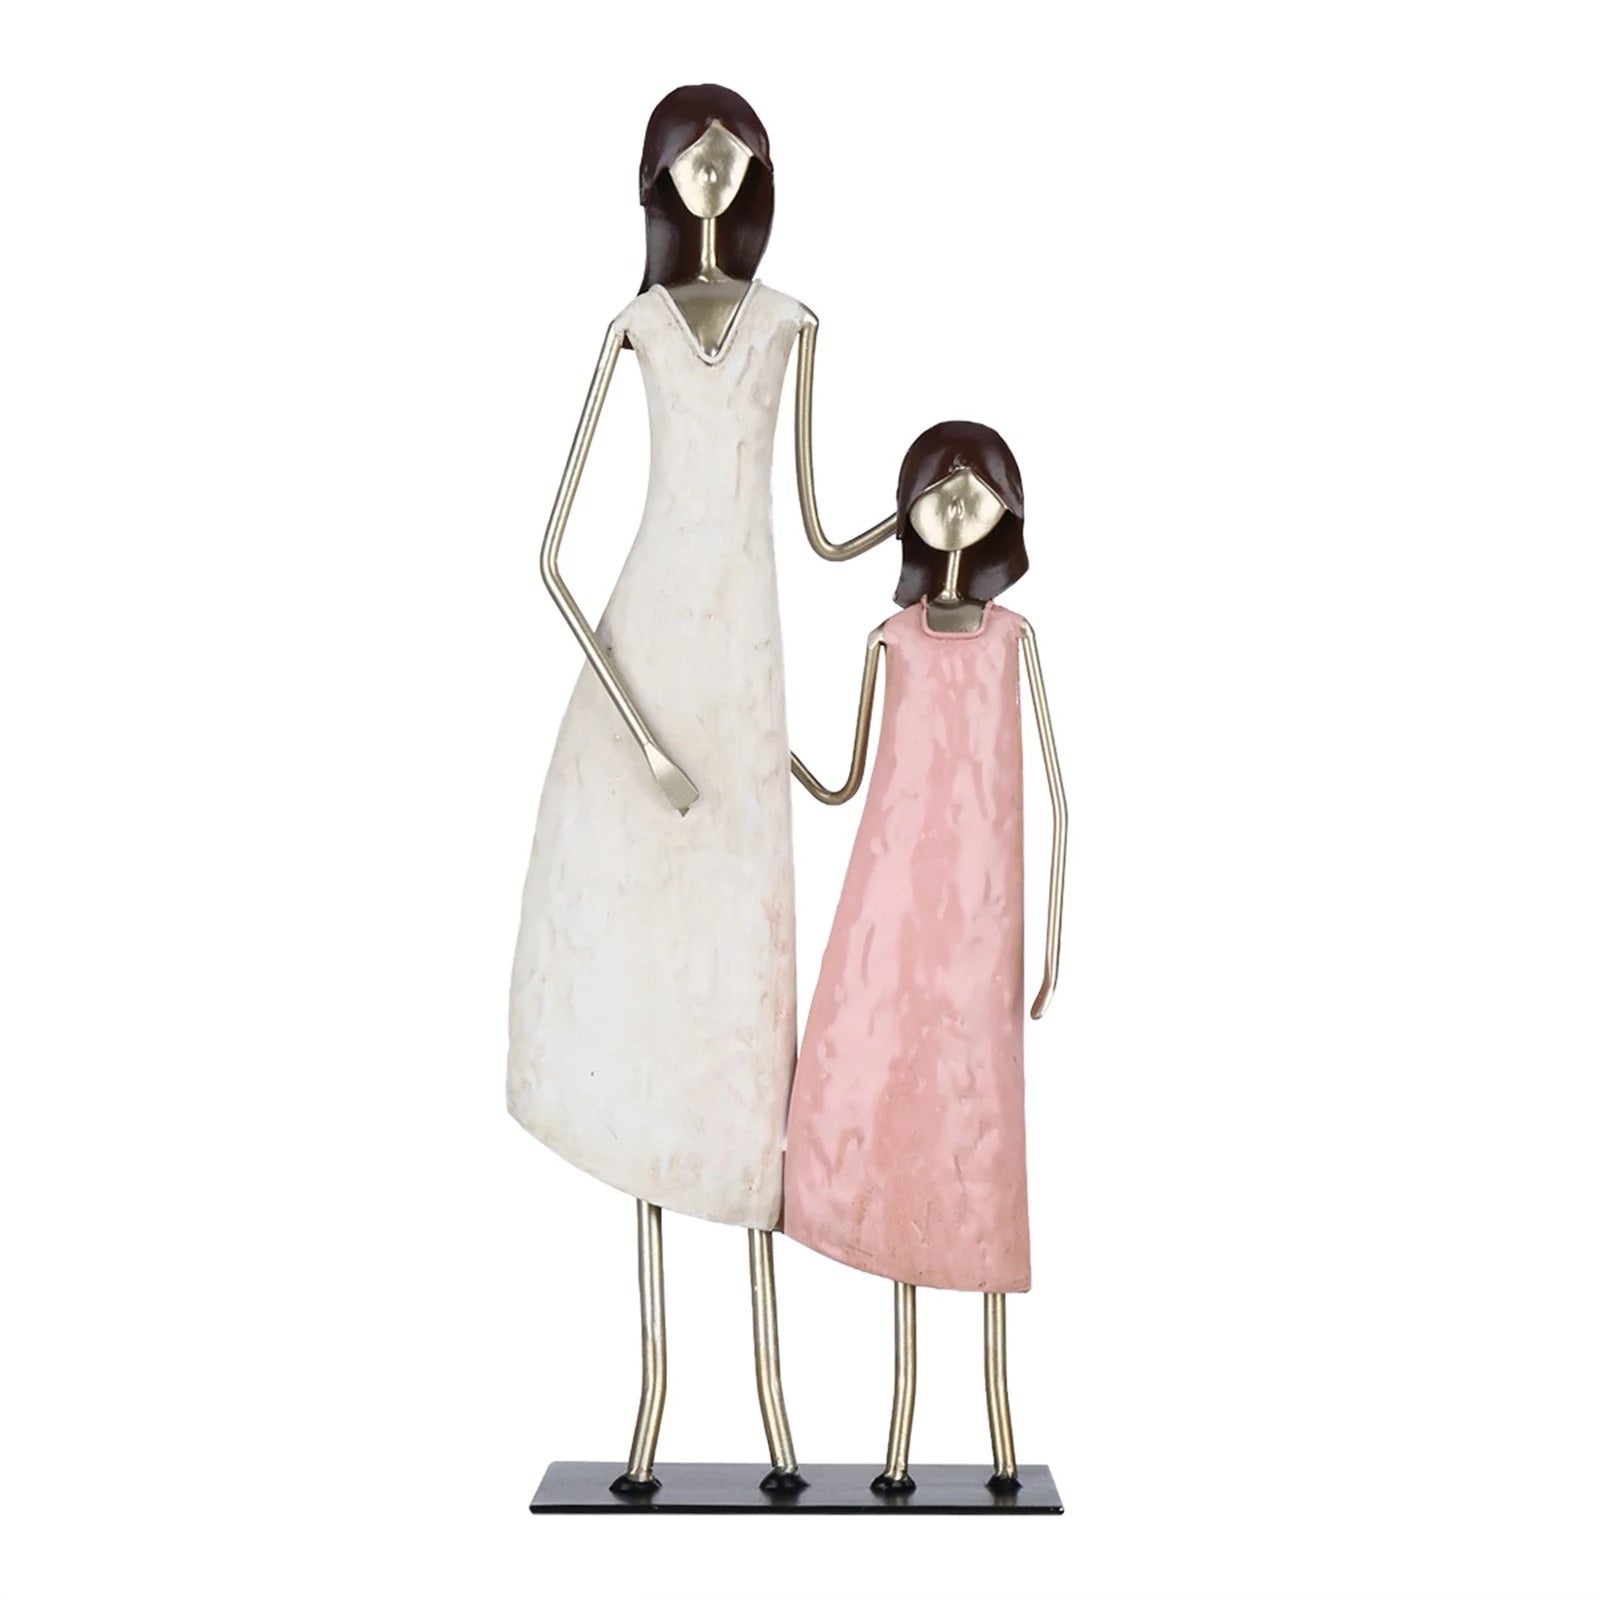 Mother Daughter Figurines for Mothers Day Gifts